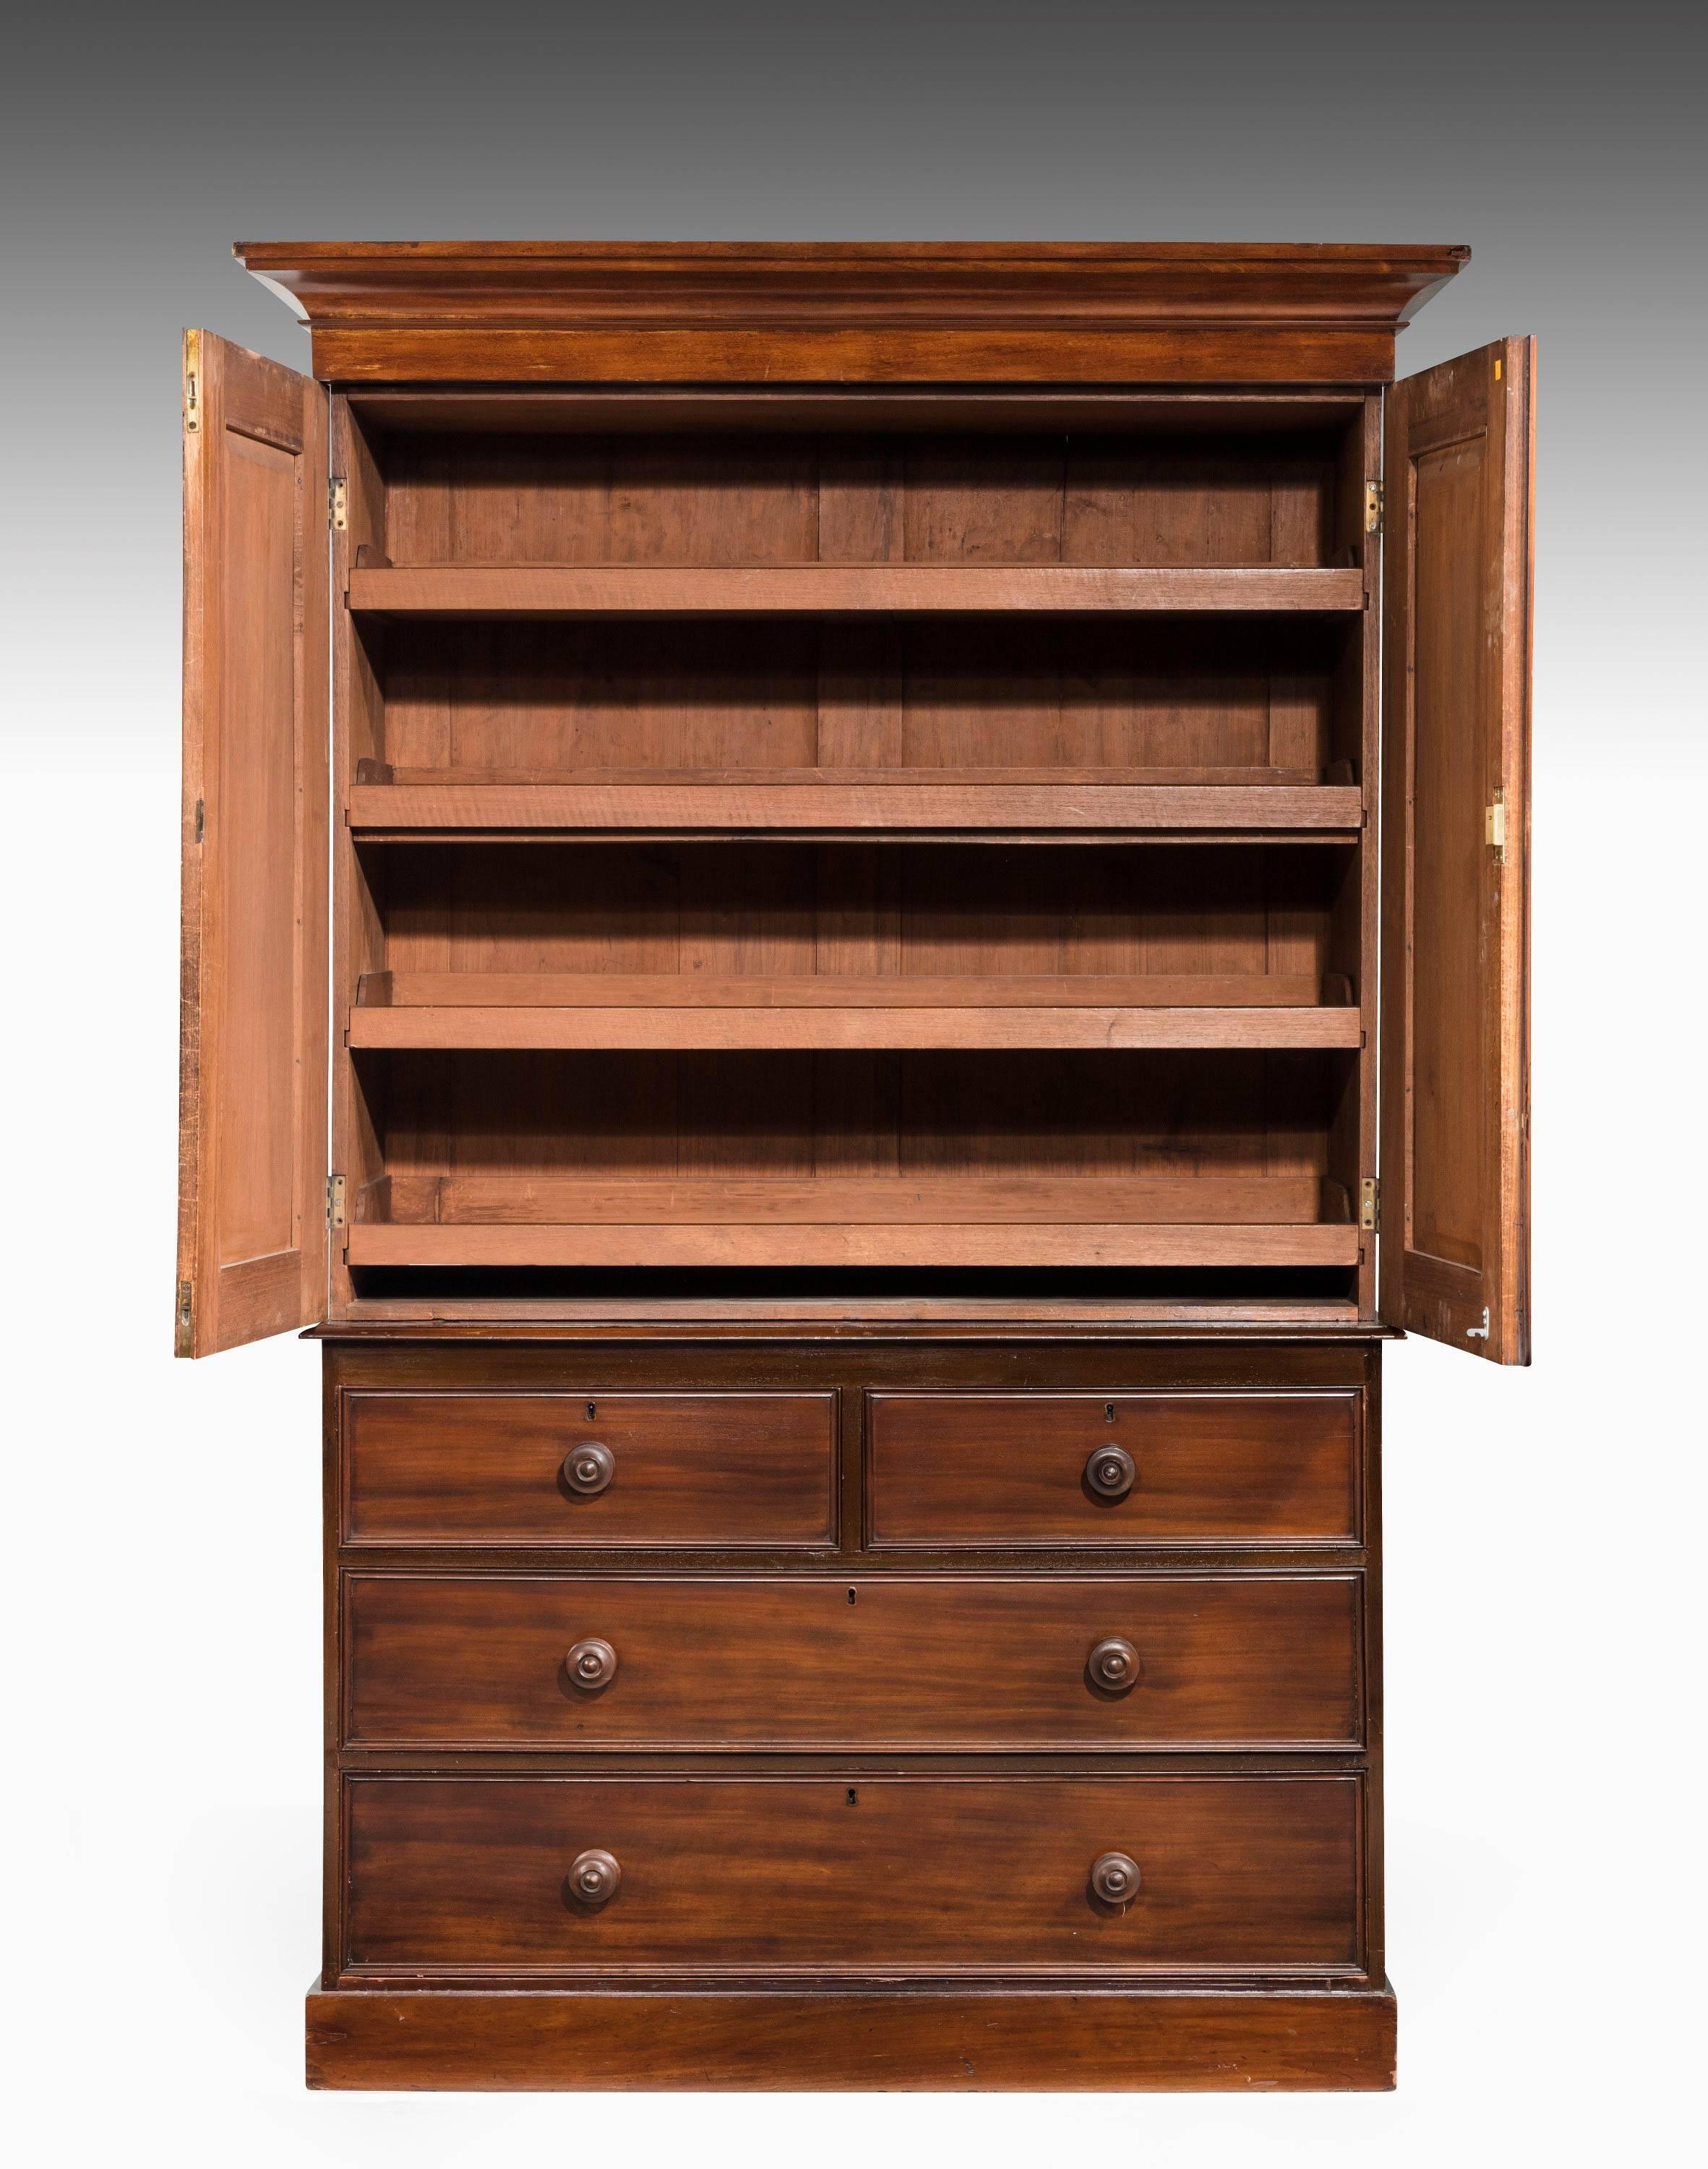 Late Regency Period Mahogany Press the Interior with Four Shelves In Excellent Condition In Peterborough, Northamptonshire